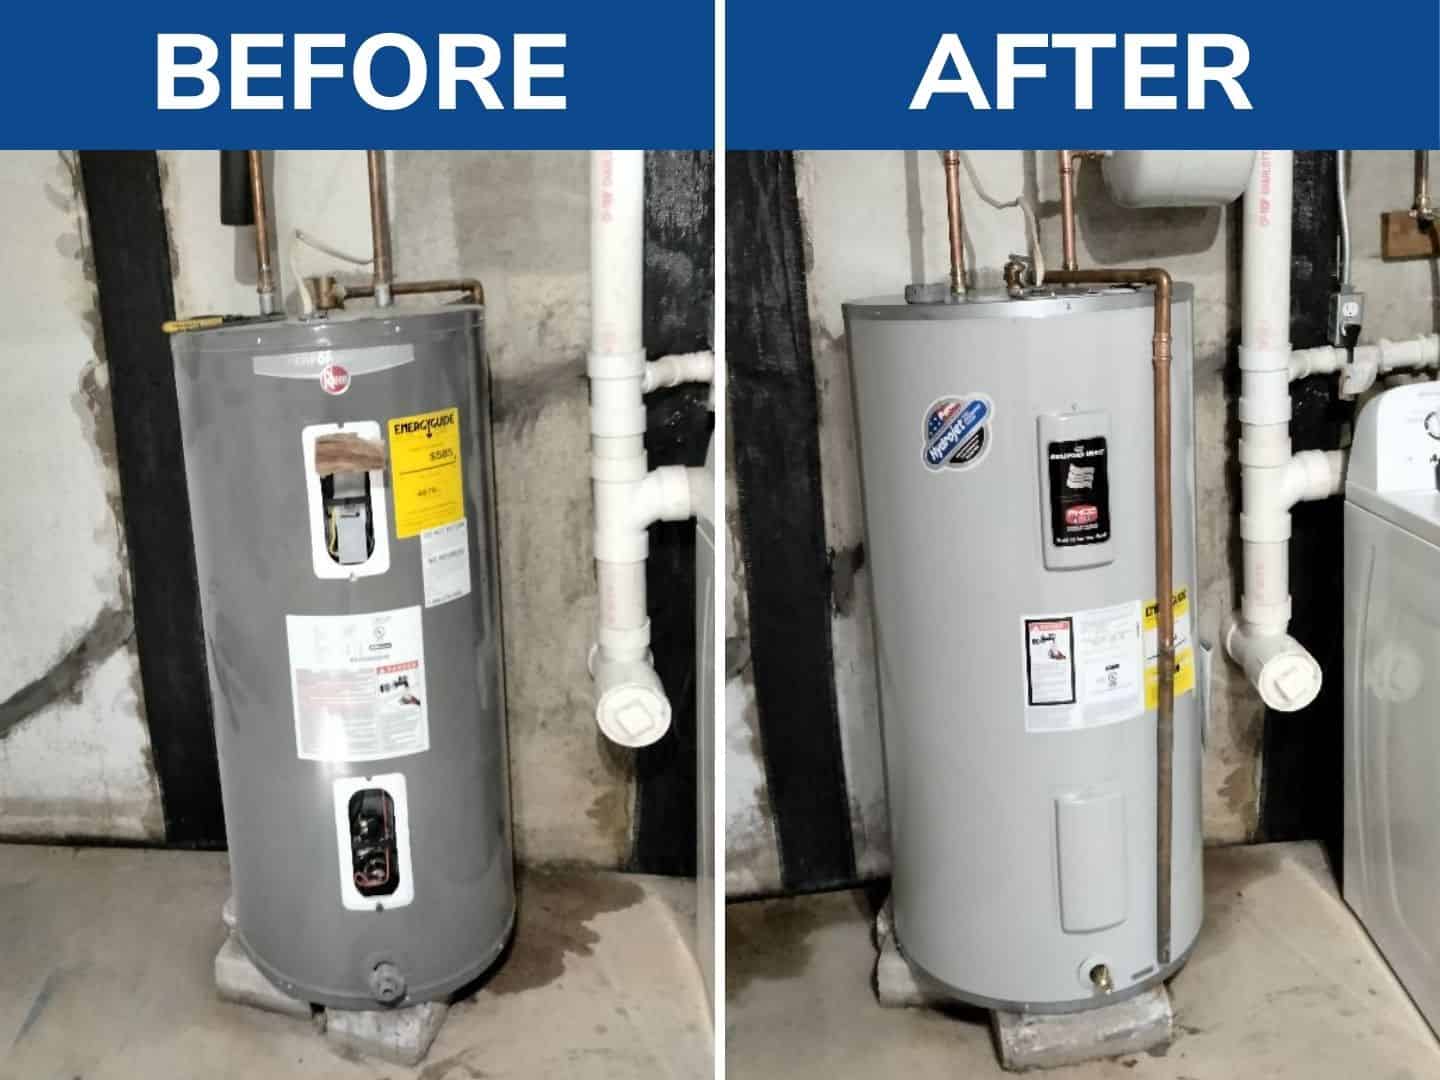 Replaced old 10-year-old Rheem water heater leaking from the bottom with new 50-gallon electric Bradford White with 2-gallon expansion tank.